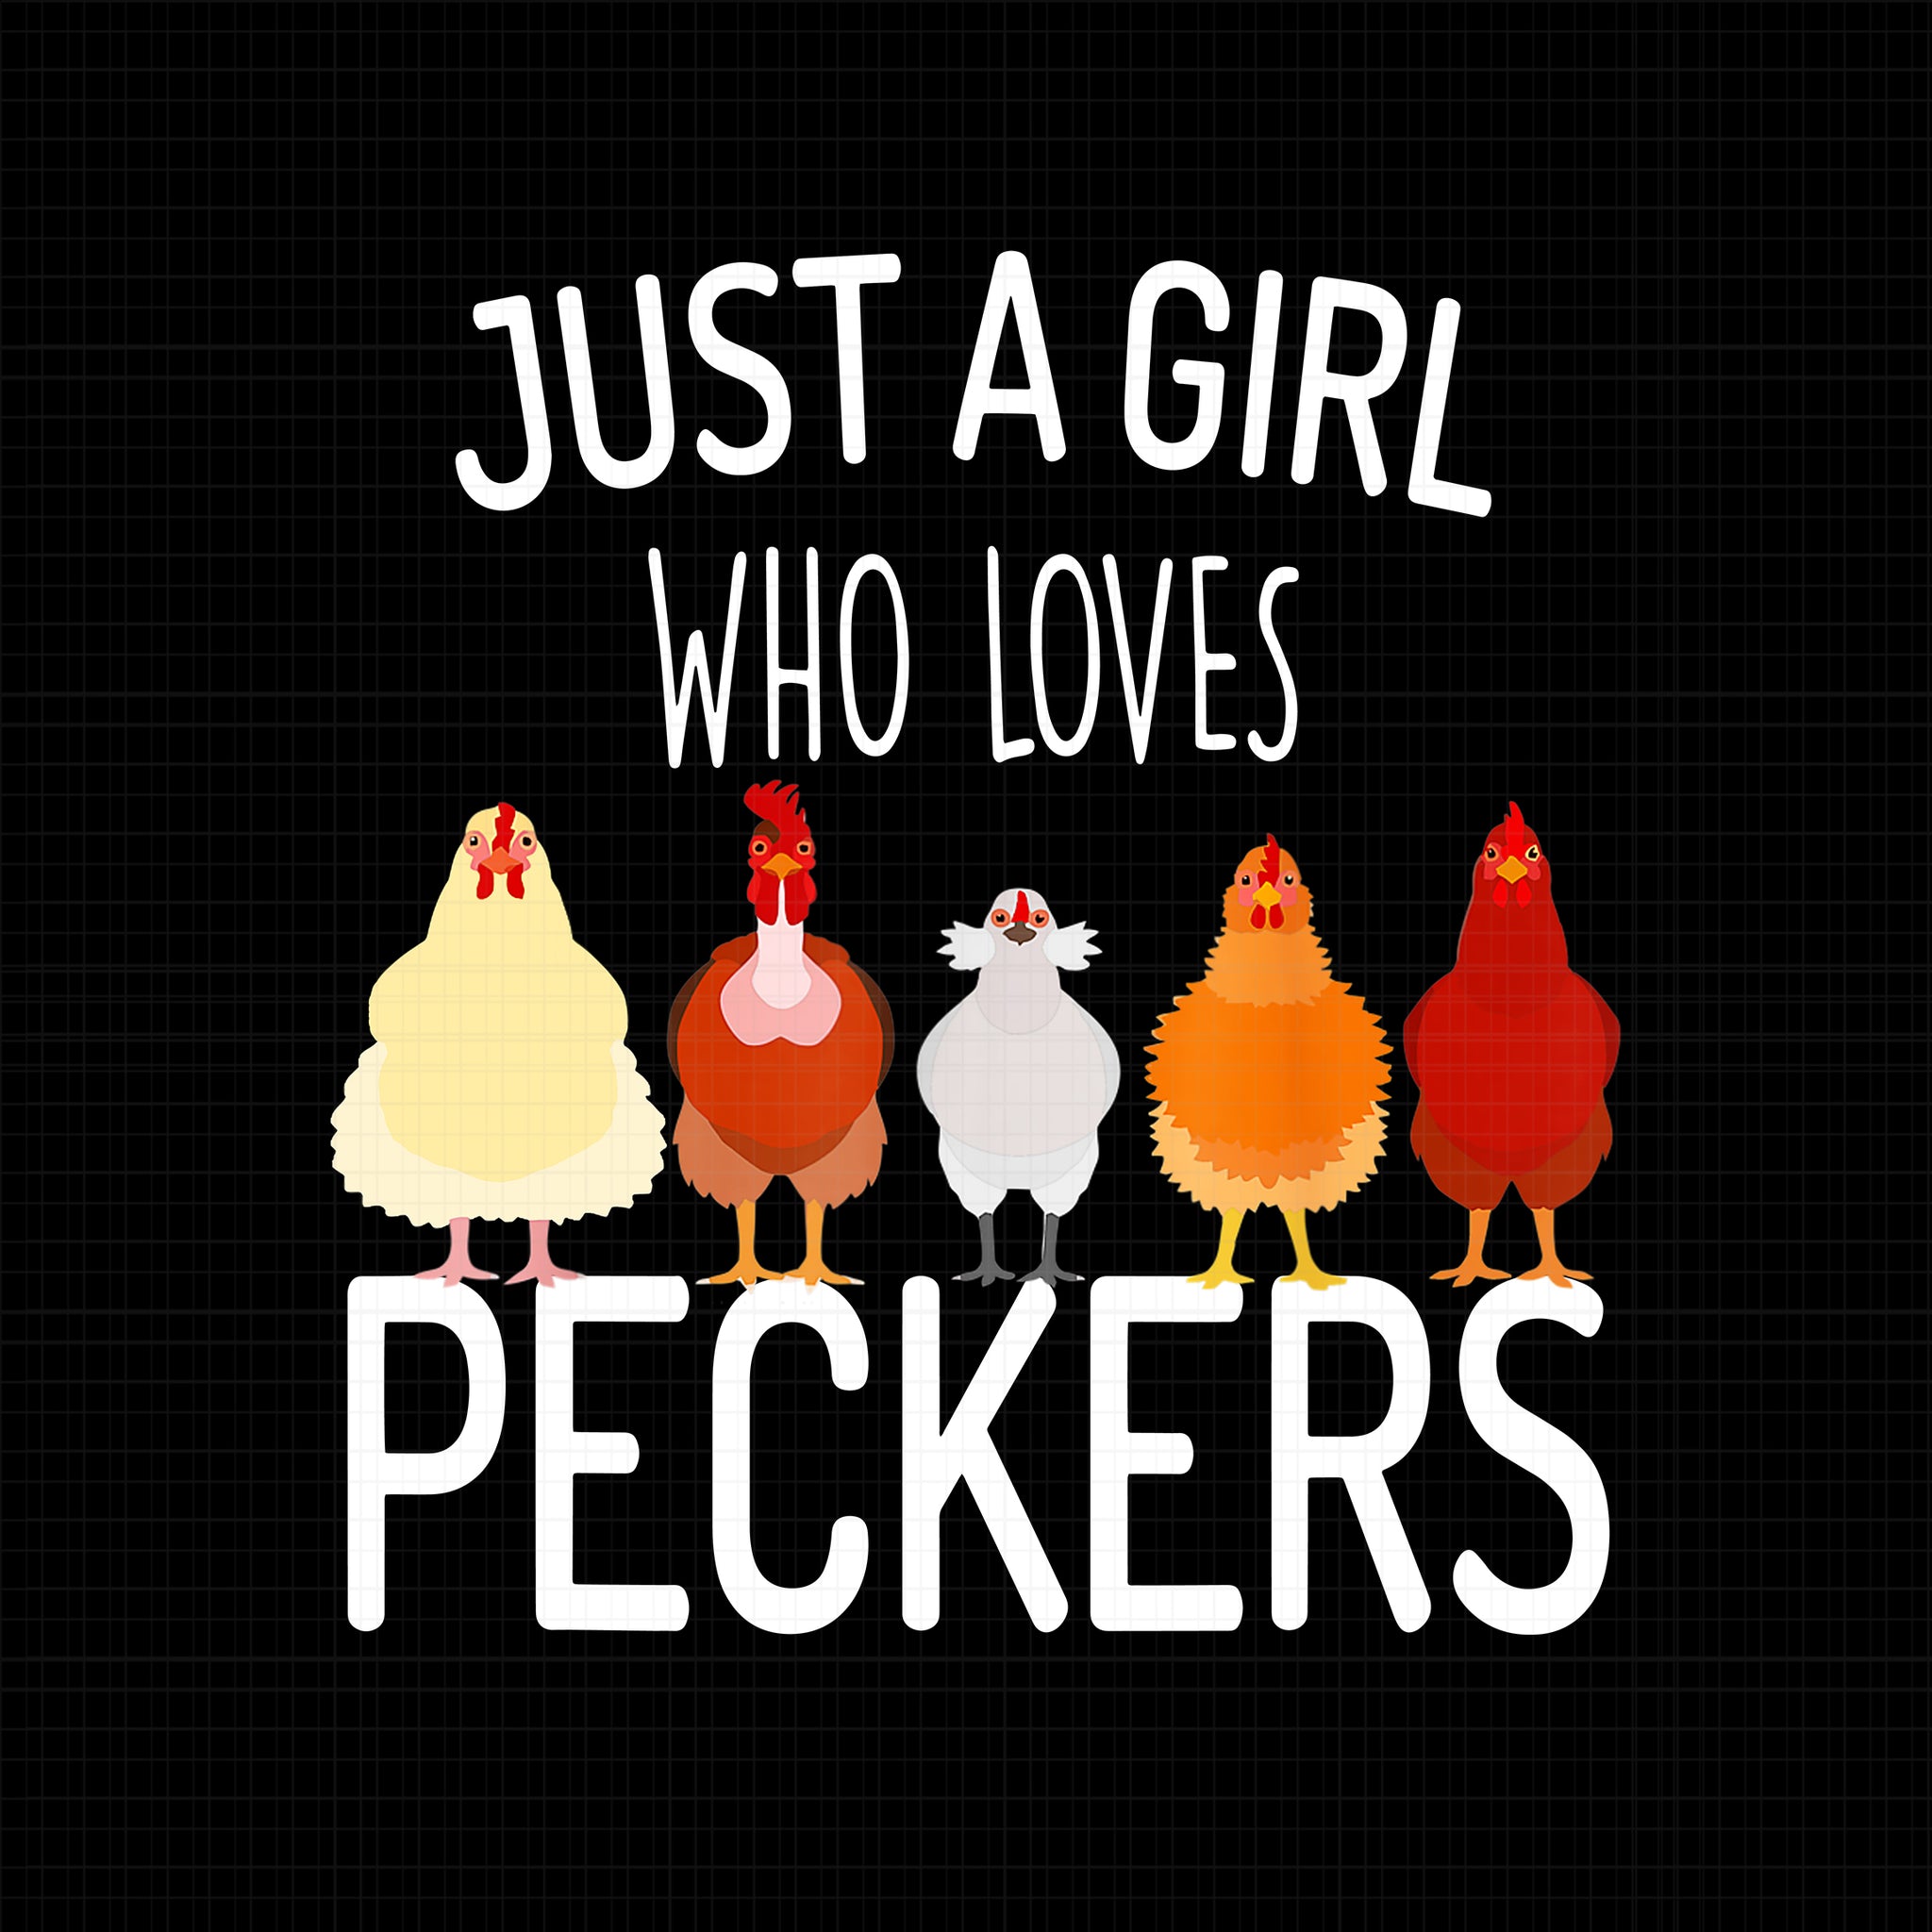 Just A Girl Who Loves Peckers Png, Chicken Lady Png, hicken Lover Png, Chicken Png, Funny Chicken